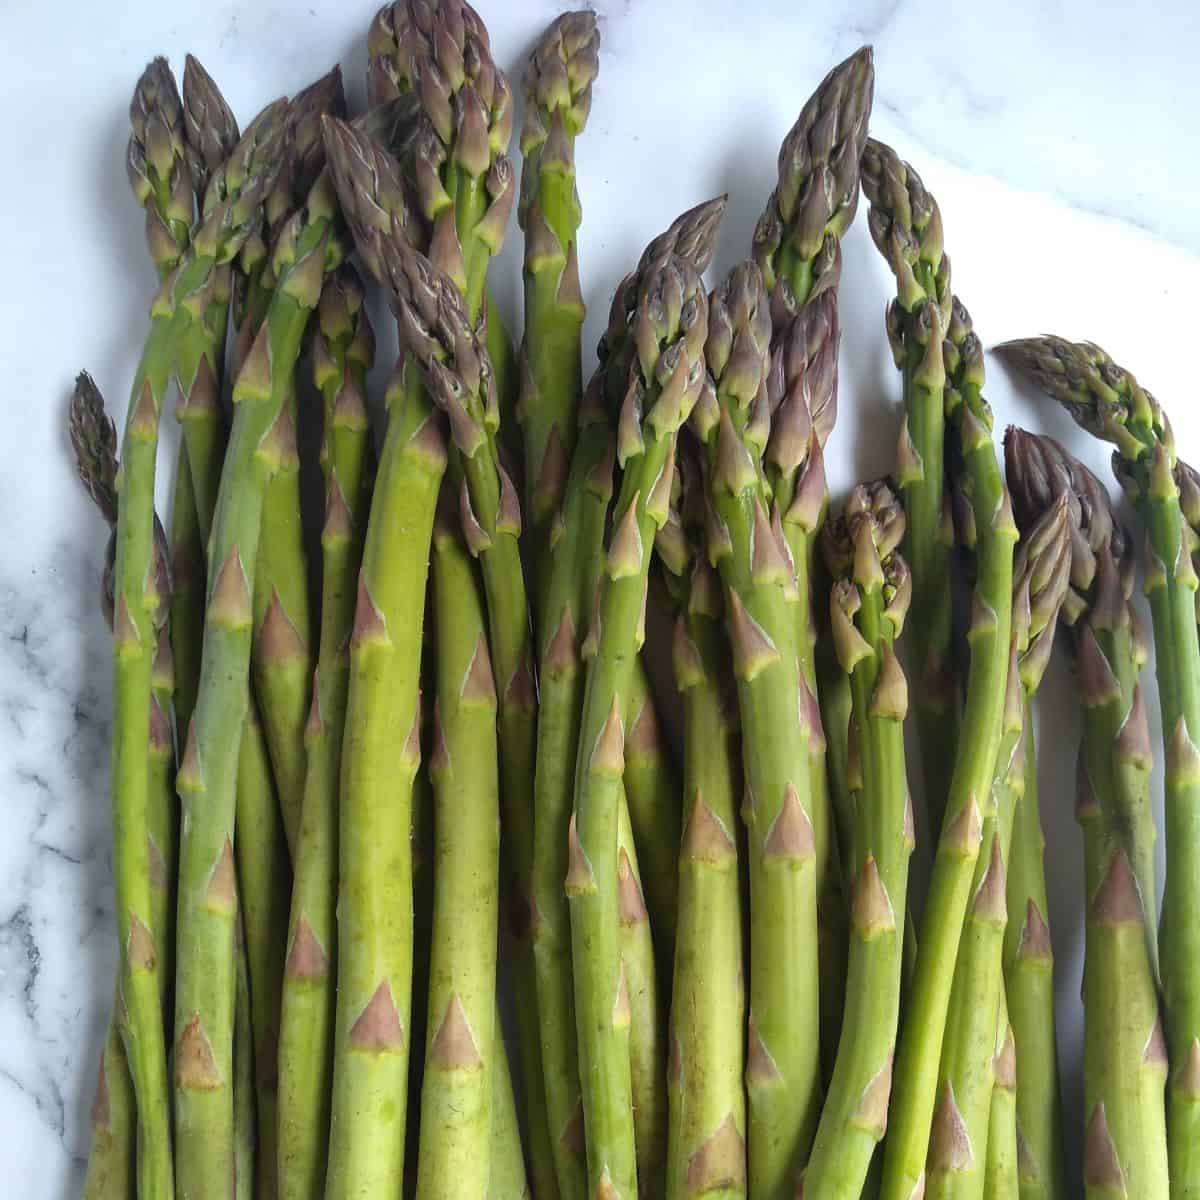 A bunch of asparagus on a marble surface

Description automatically generated